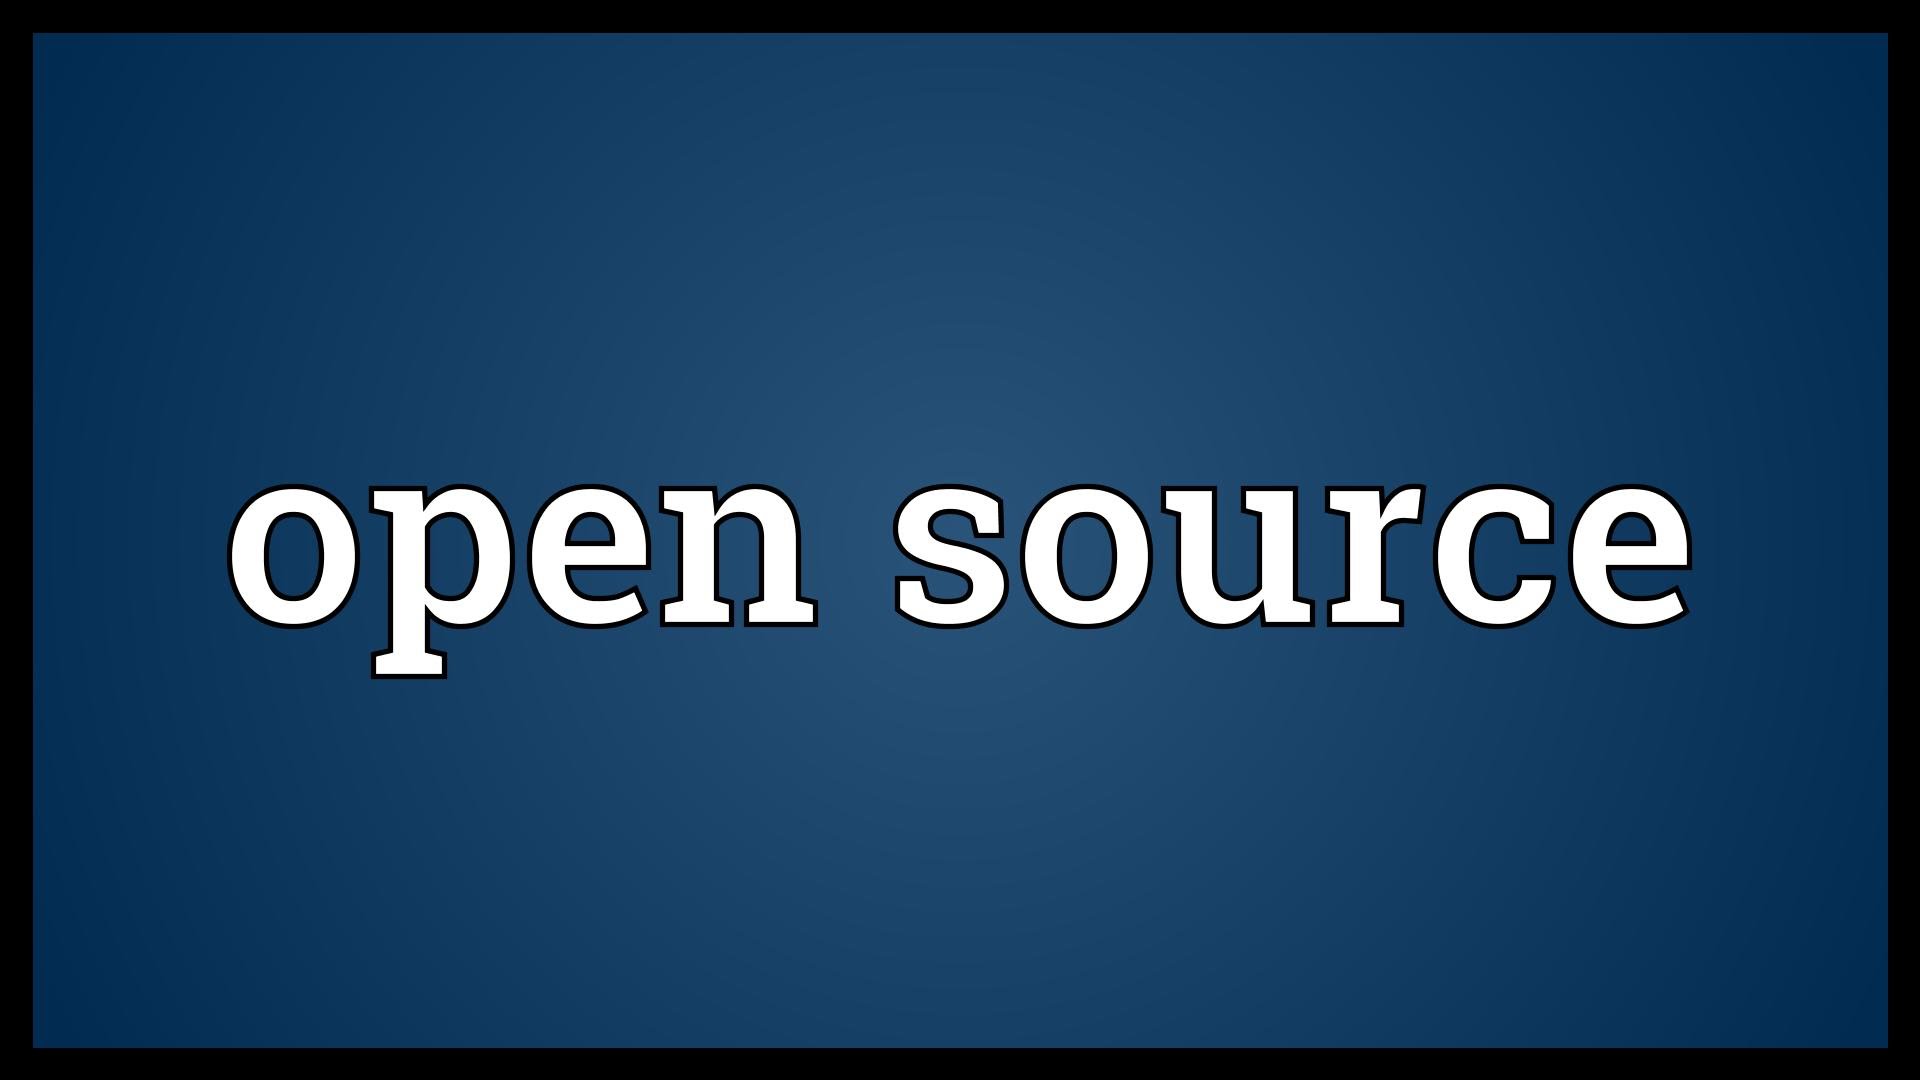 How to get started with open source?